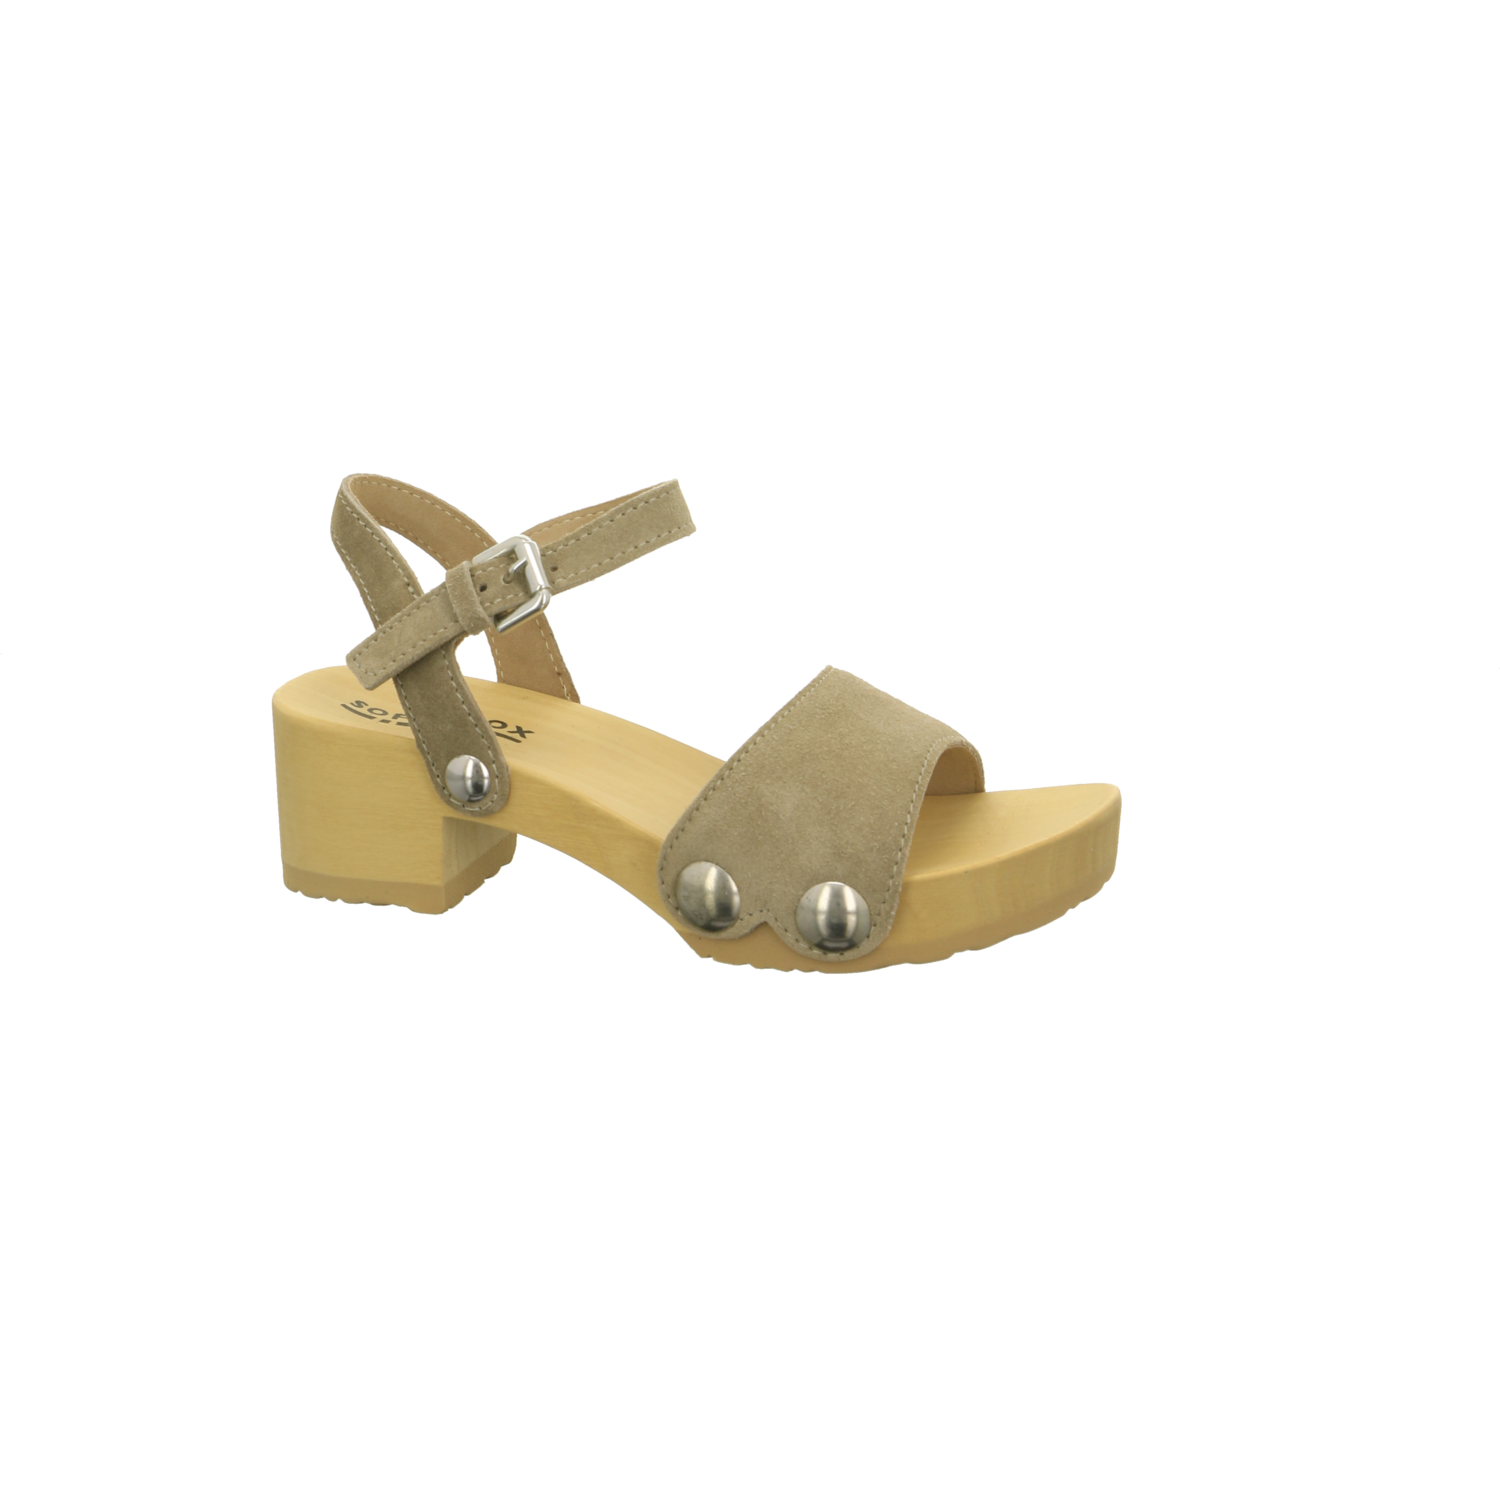 Softclox Sandalette bis 45 mm taupe